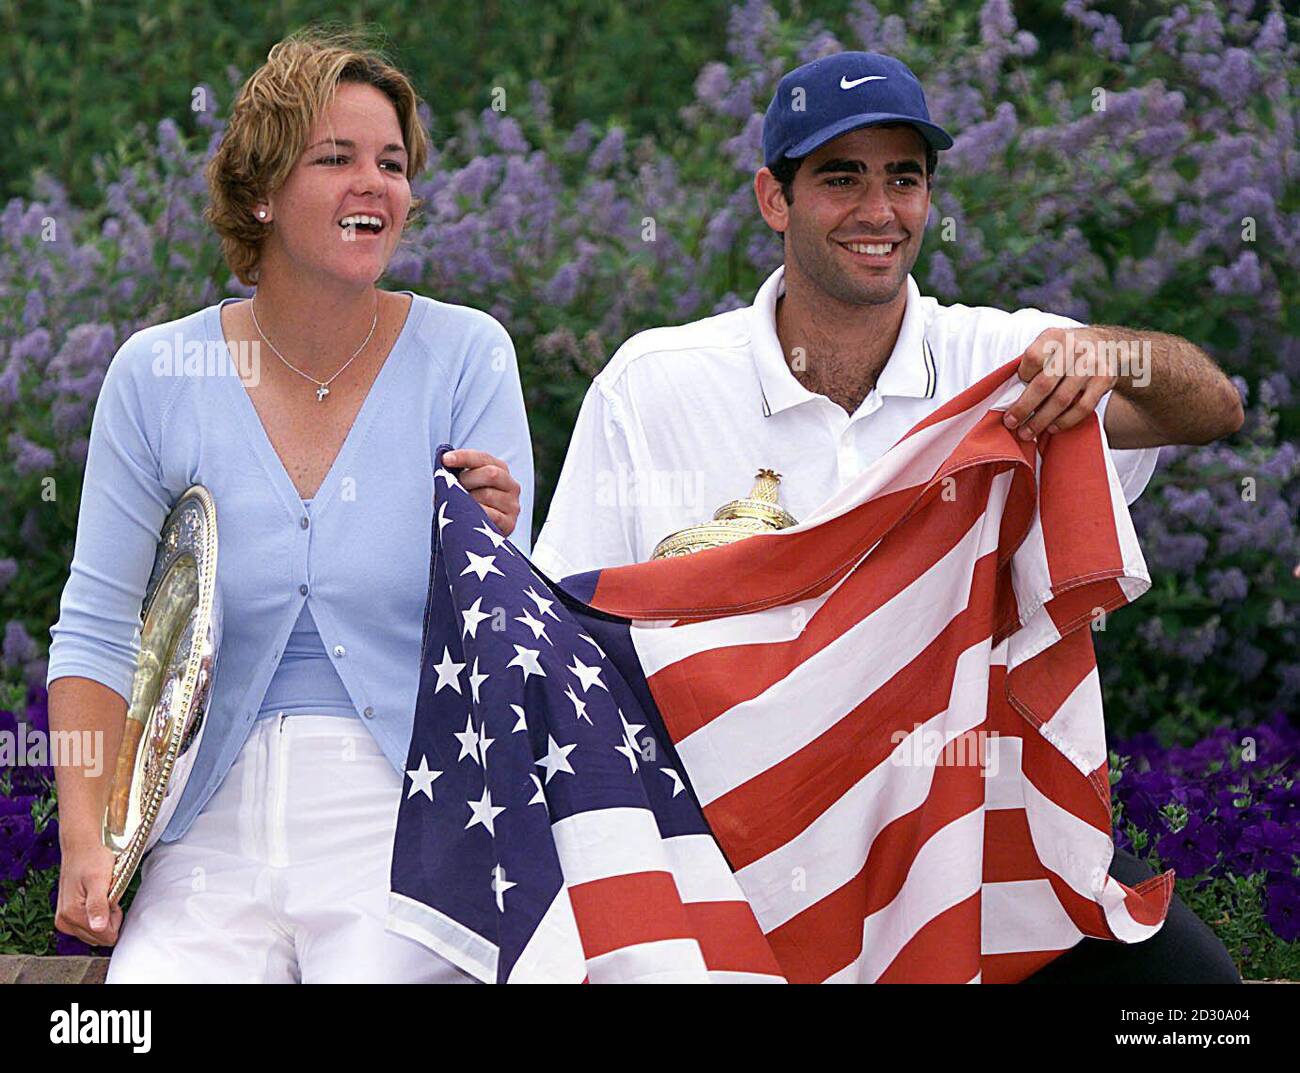 No Commercial Use : Wimbledon single winners Lindsay Davenport and Pete Sampras struggle with the American flag after wind engulfed them during a photo-call at Wimbledon. Sampras defeated Agassi 6-3 6-4 7-5  and Davenport defeated Graf 6-4 7-5. Stock Photo